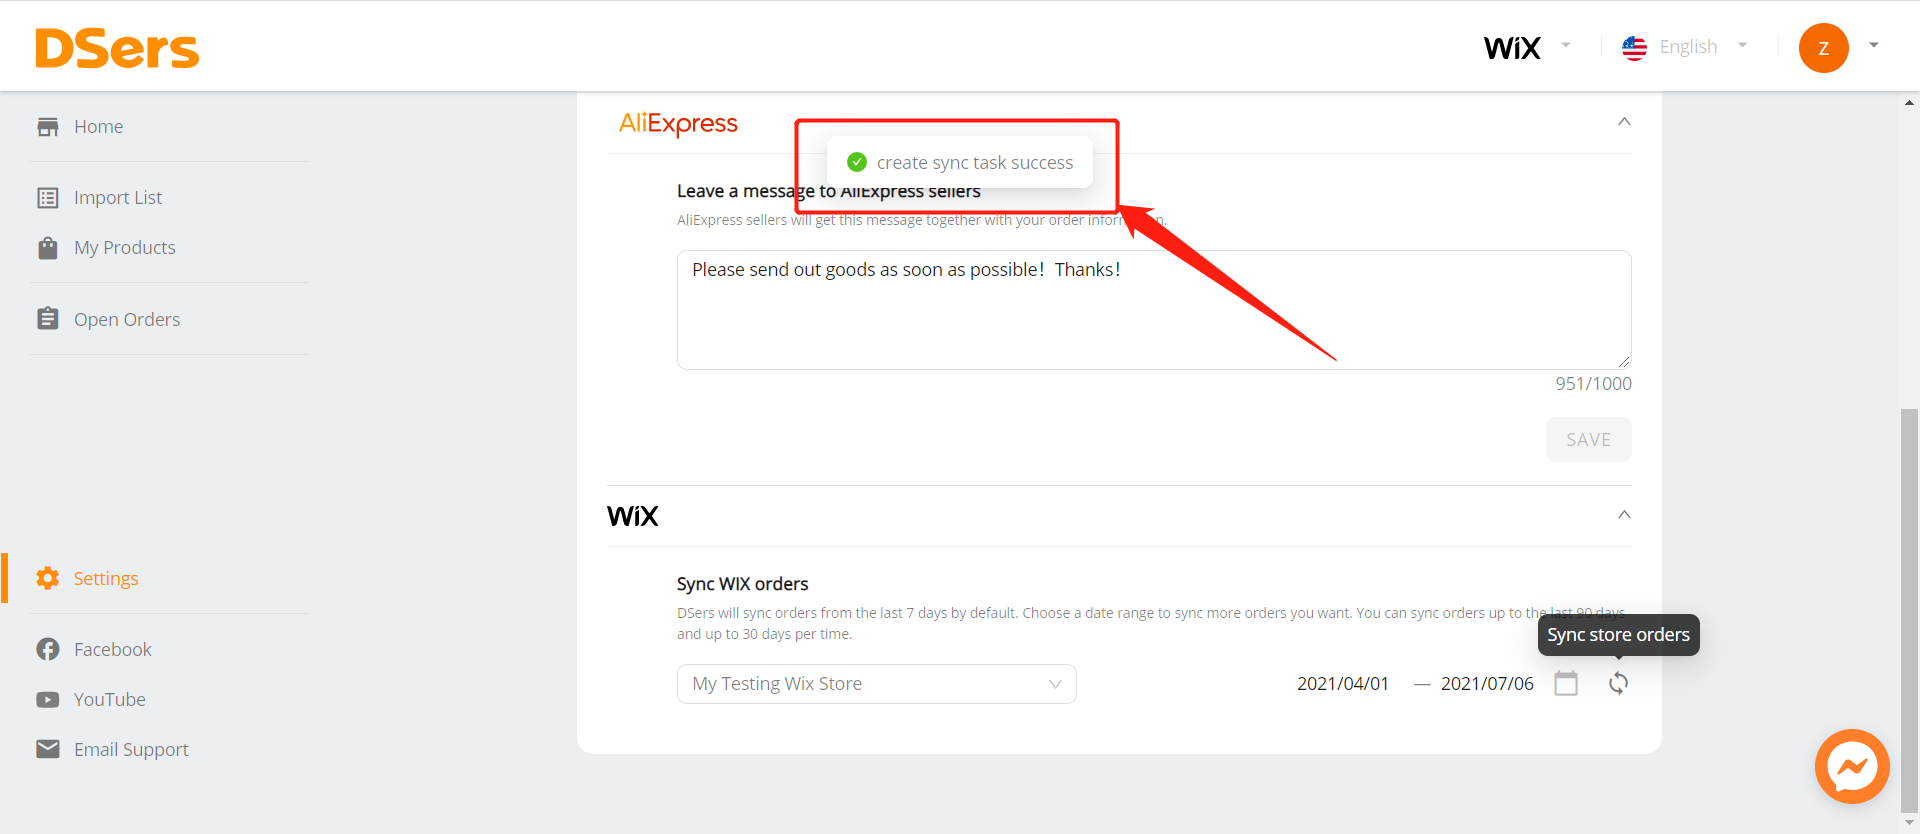 Synchronize Orders from Wix - Settings - Other - Sync Notification - Wix DSers